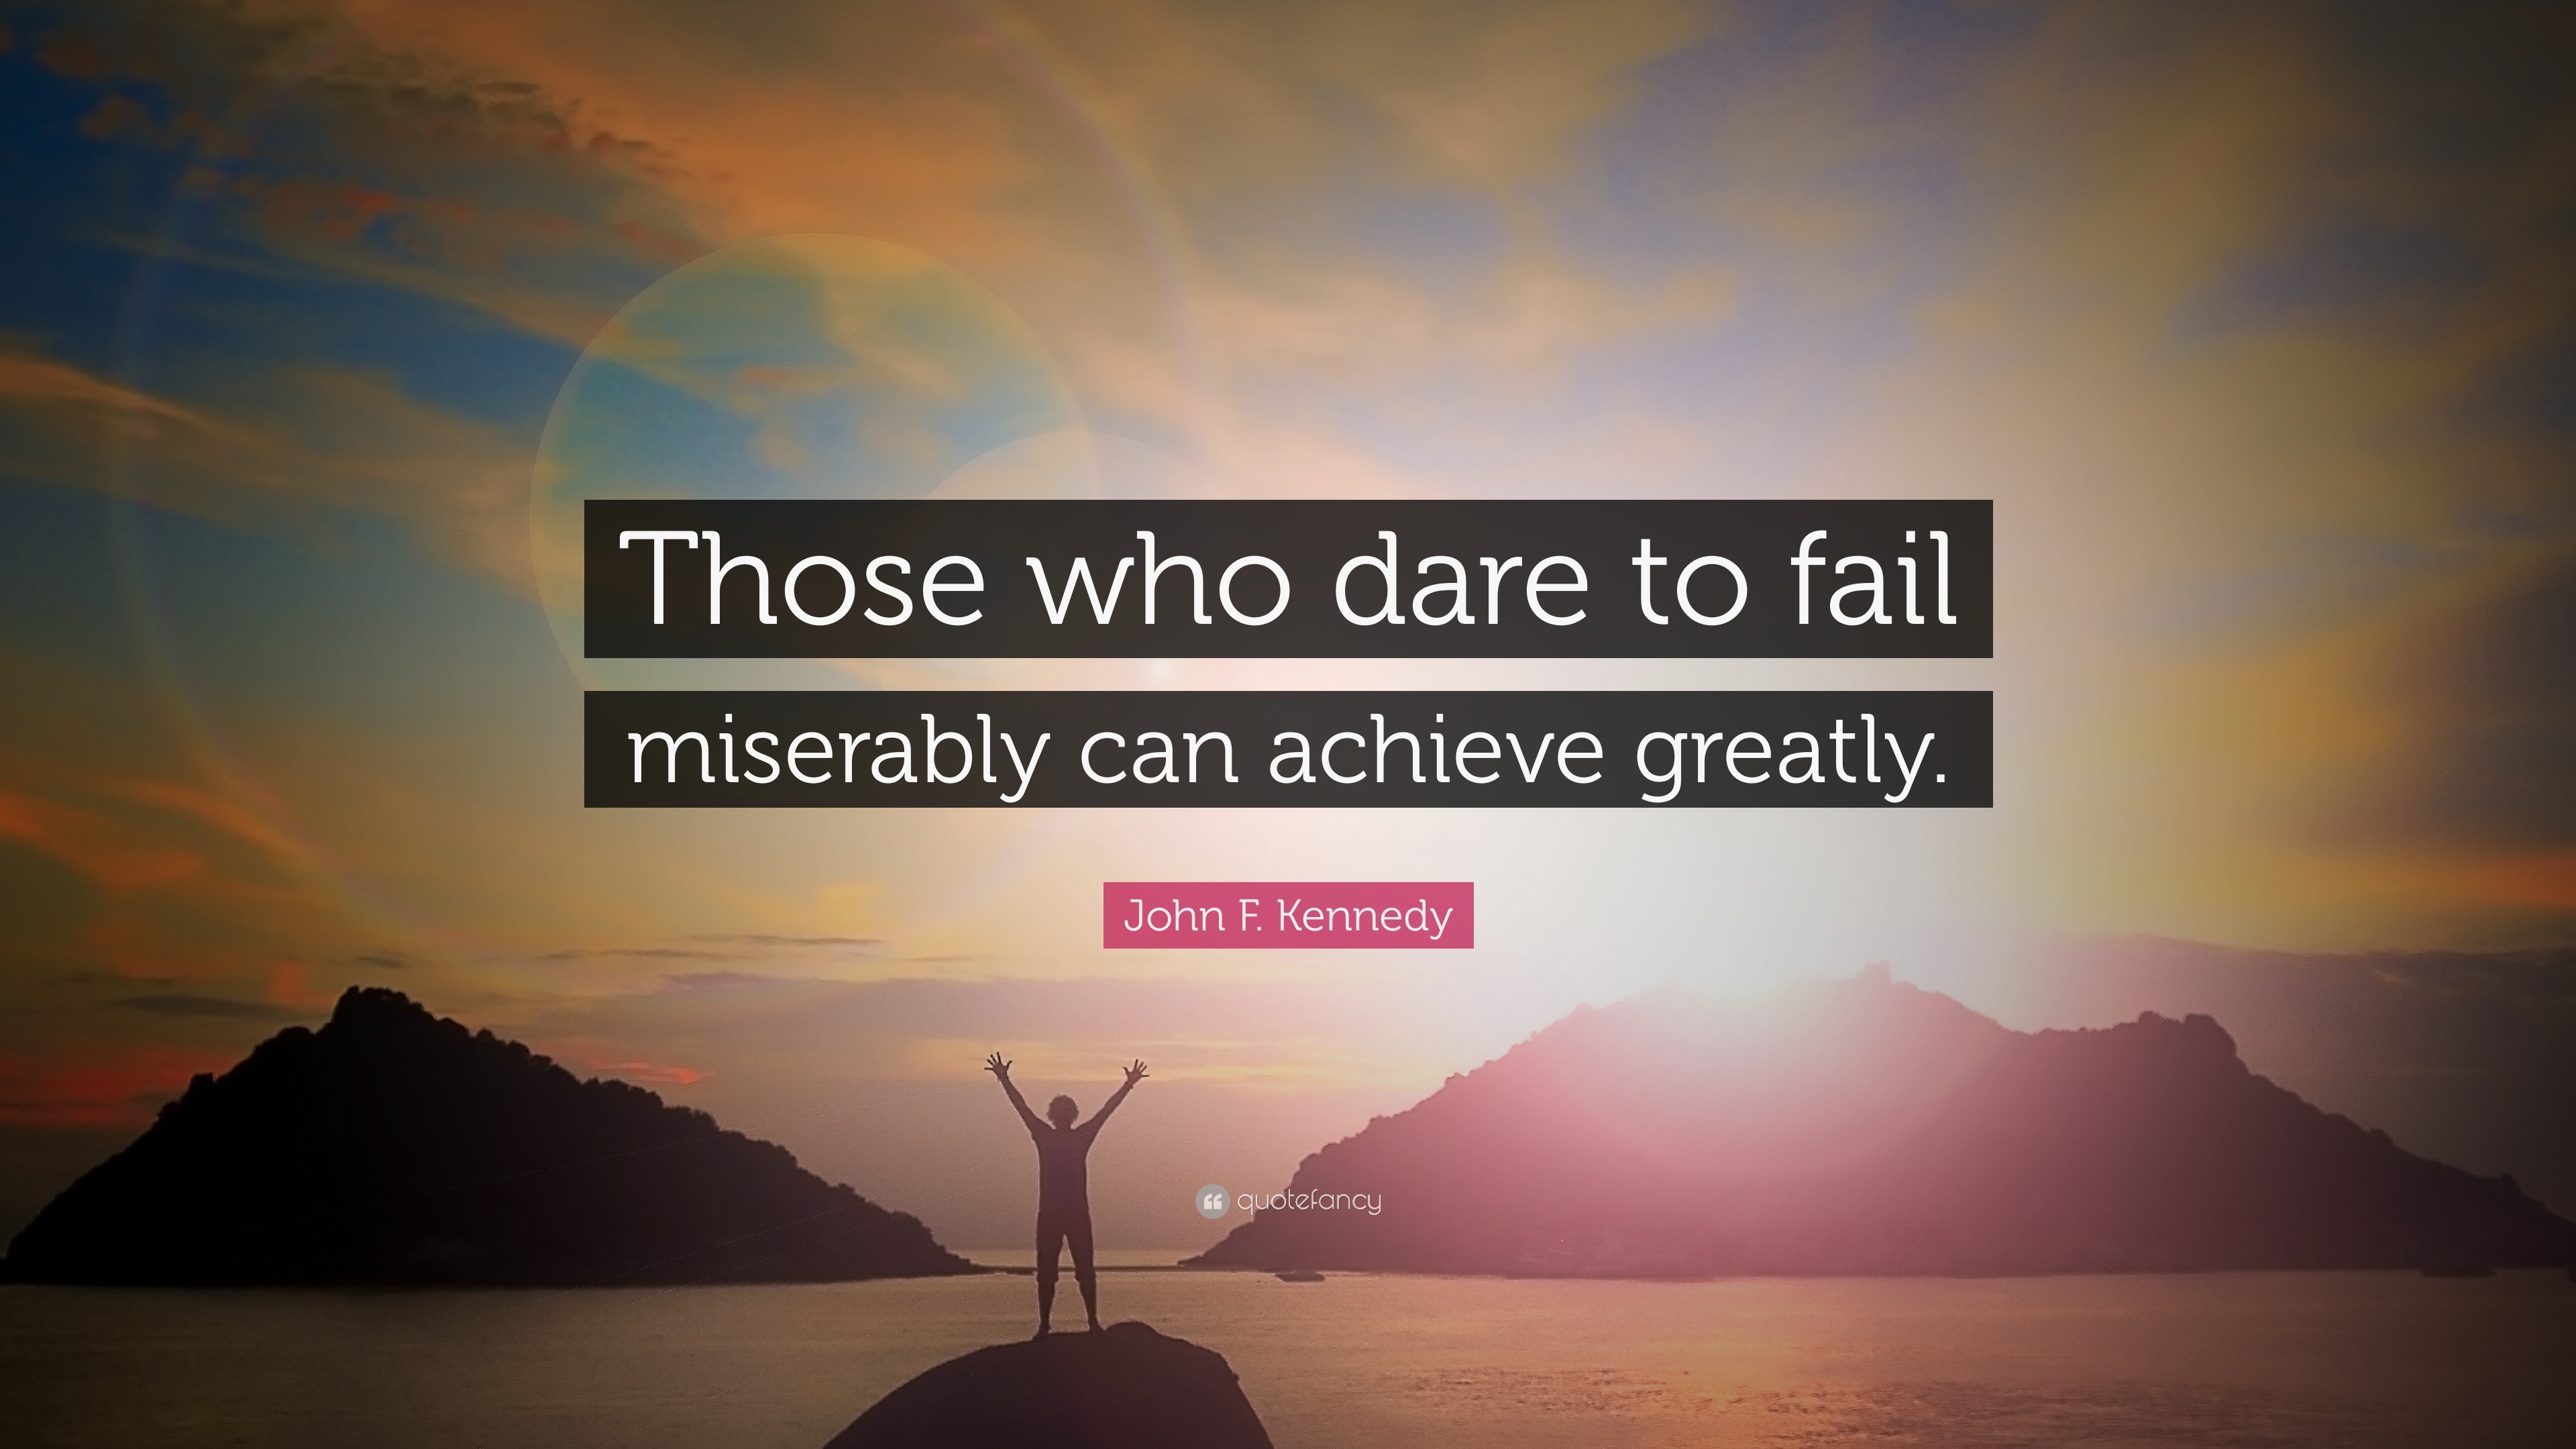 100 Inspiring Courage Quotes to Help You Rise to The Occasion